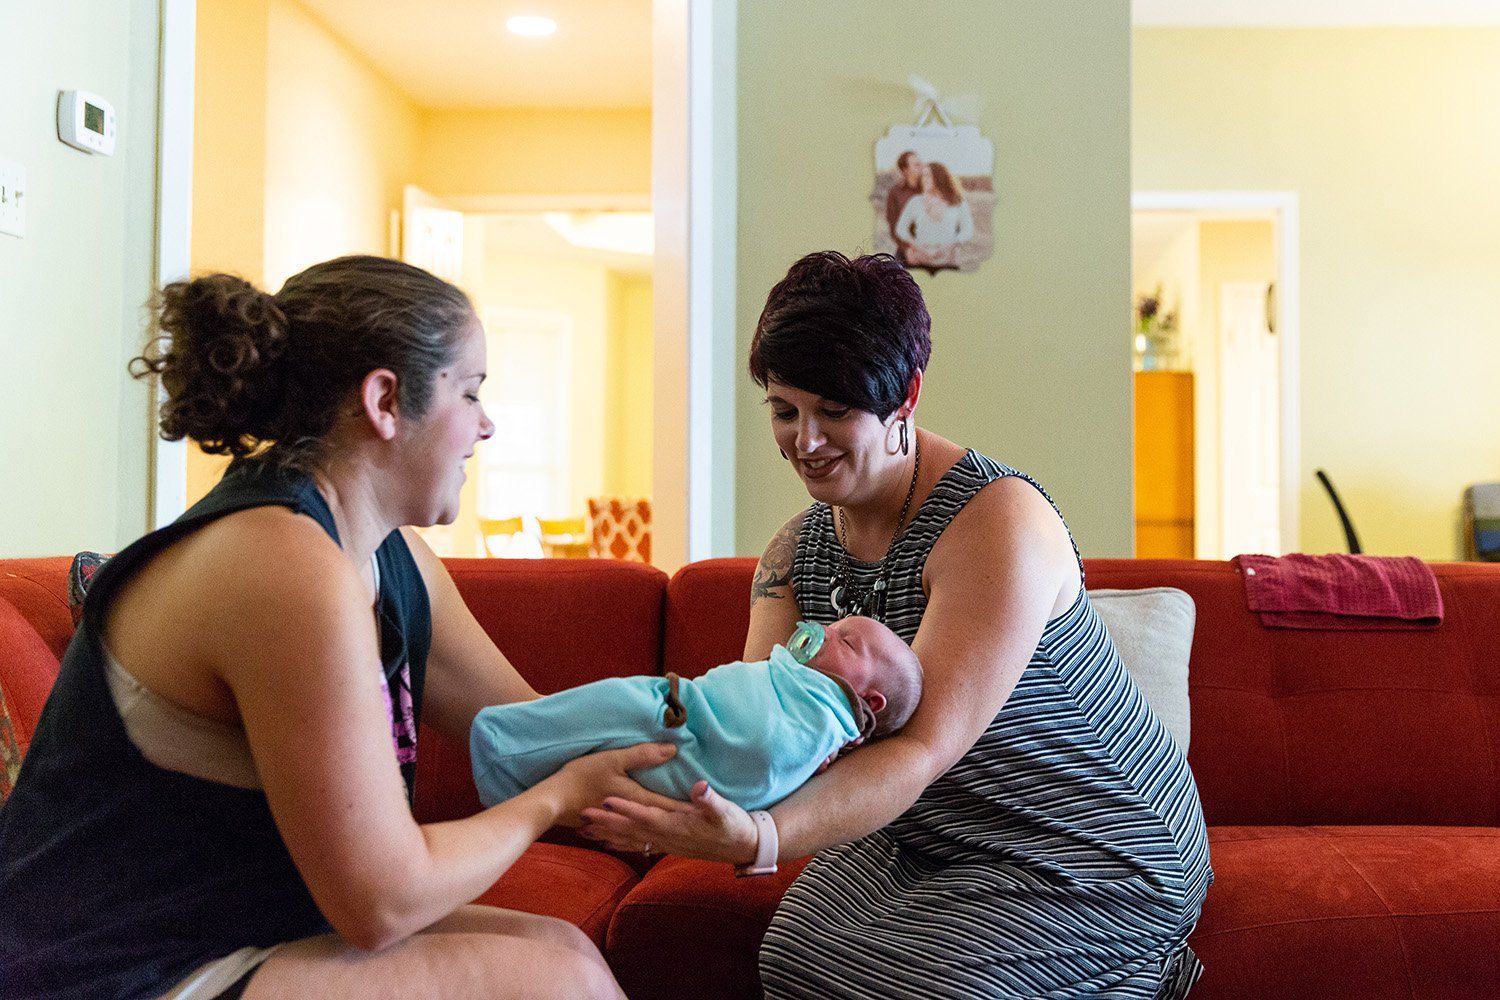 Hailey Frazier (left) gives her son Isaac to Sabrina Elliott (right), a doula in Abilene during a home visit. Image by Gary Rhodes for The Texas Tribune. United States, 2018. 